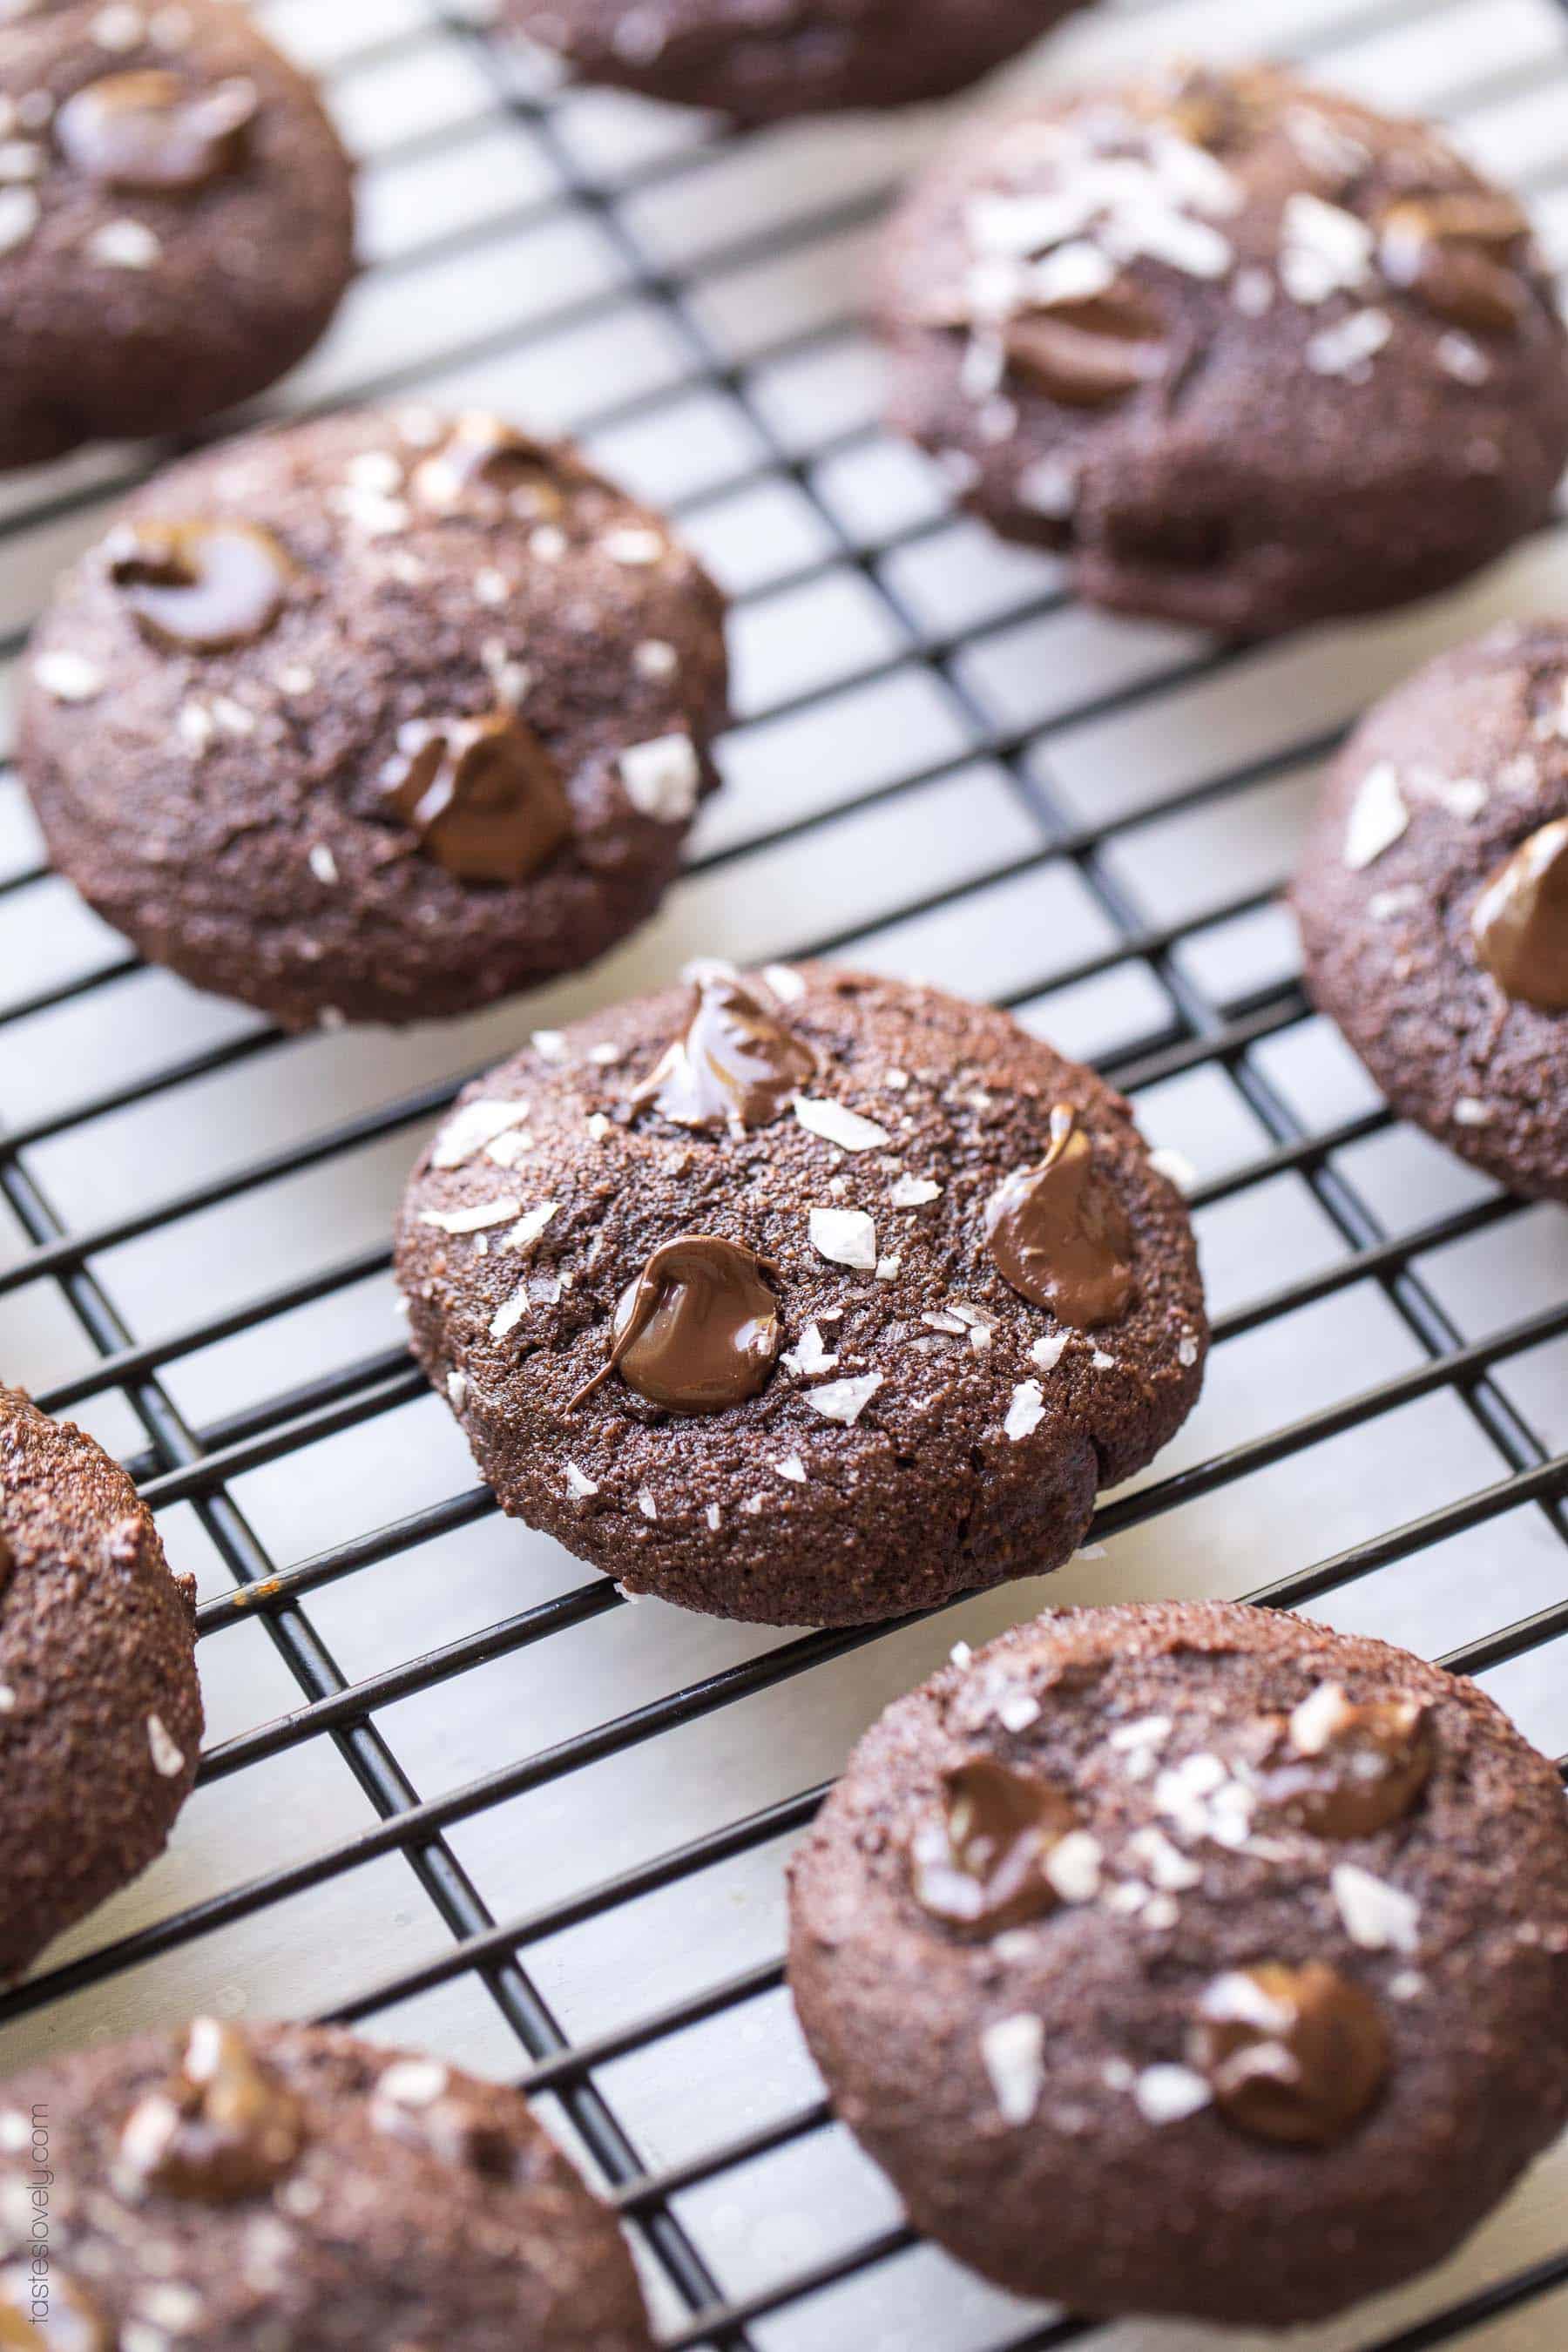 Paleo Salted Chocolate Brownie Cookies Recipe - made with almond flour and sweetened with coconut sugar! (gluten free, grain free, dairy free, refined sugar free, clean eating, keto